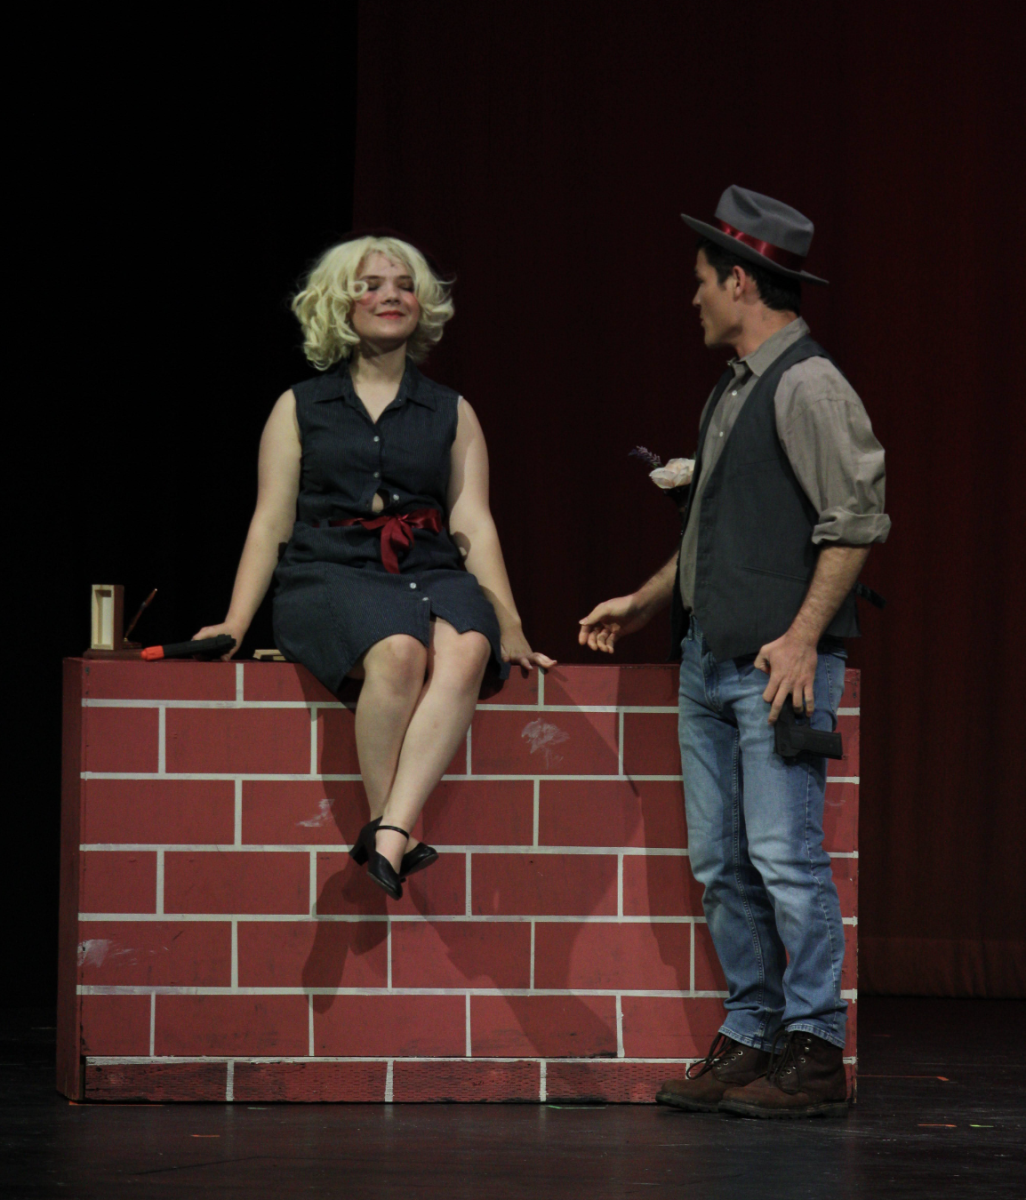 Emma Olsen (10) playing Bonnie, and Jack Hubschmitt (12) playing Clyde, perform The Ballad of One Bonnie Parker, during Westview Theatres One Acts festival.
Courtesy of Connor Pietsch